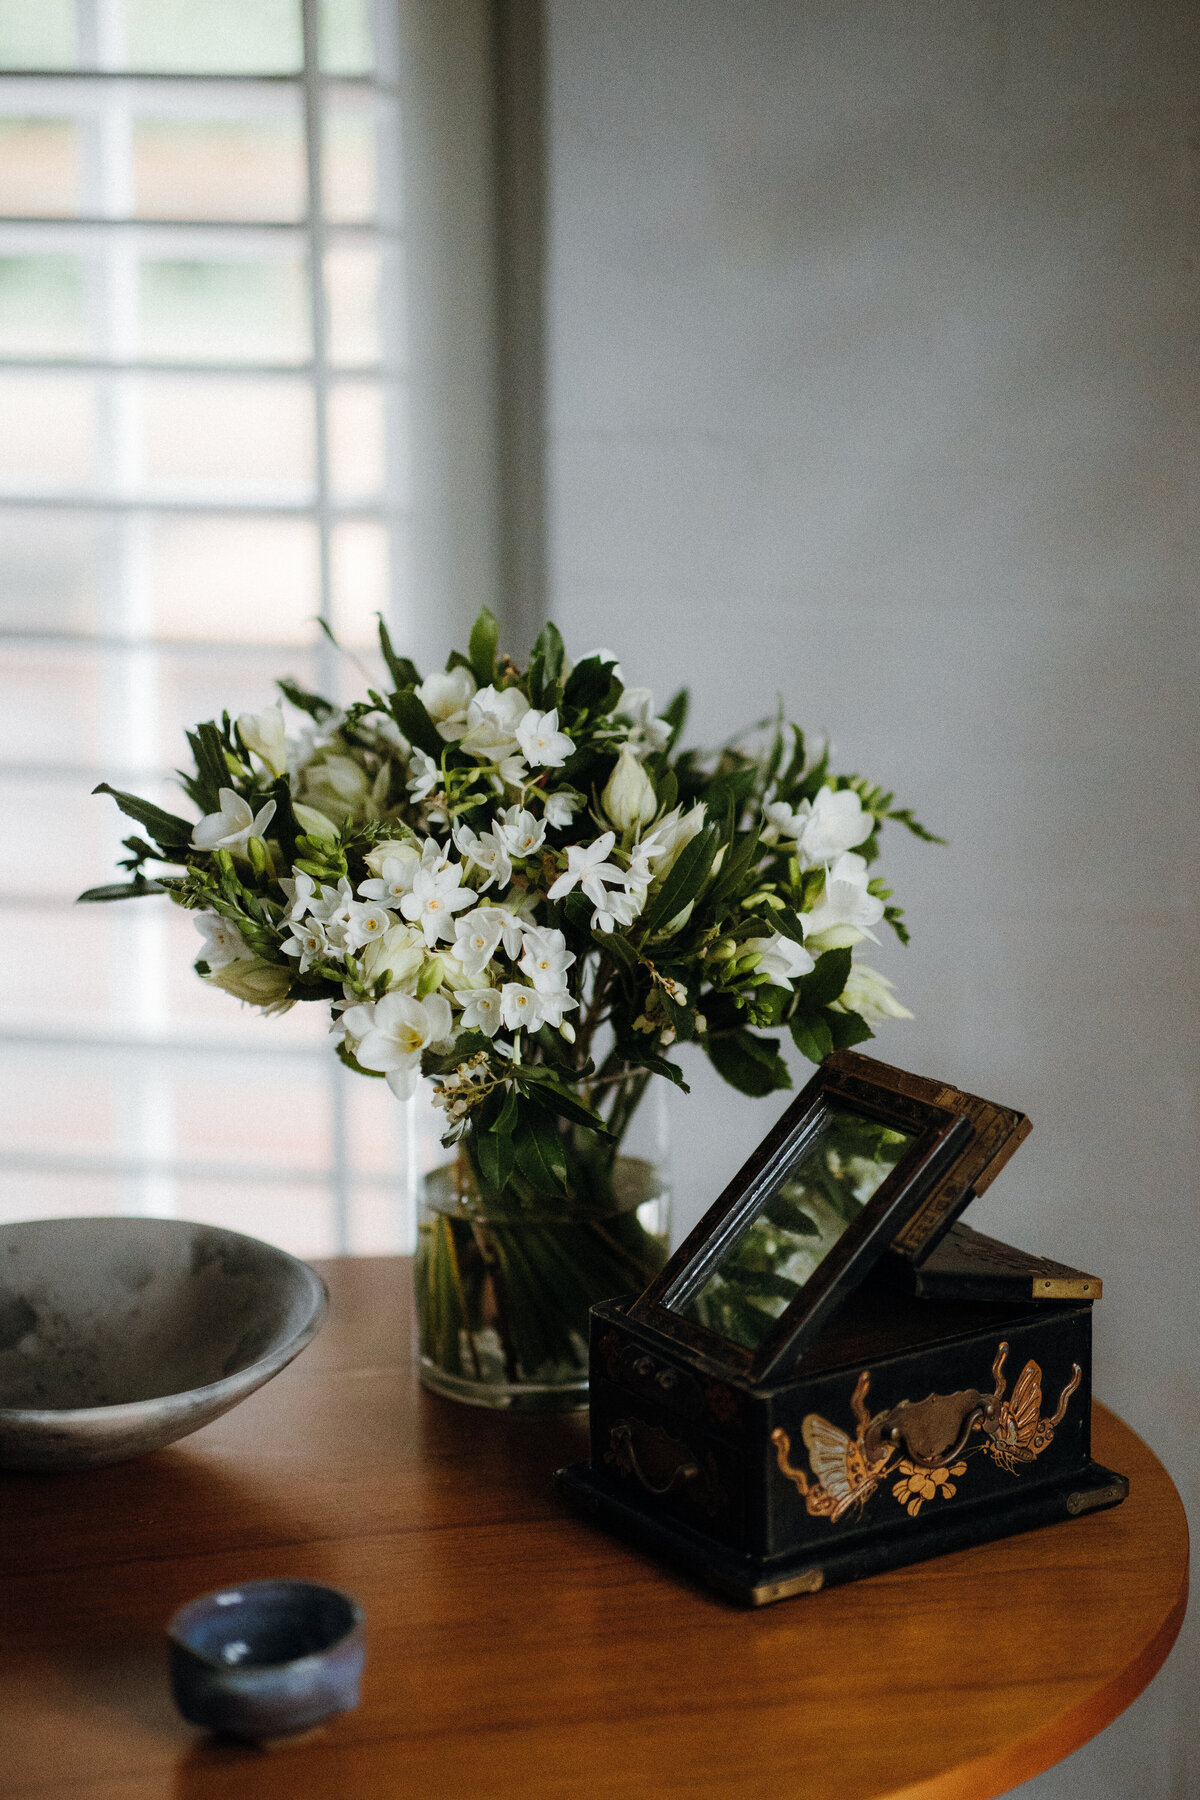 A vintage box, a bowl, and a bouquet of flowers in a glass vase.